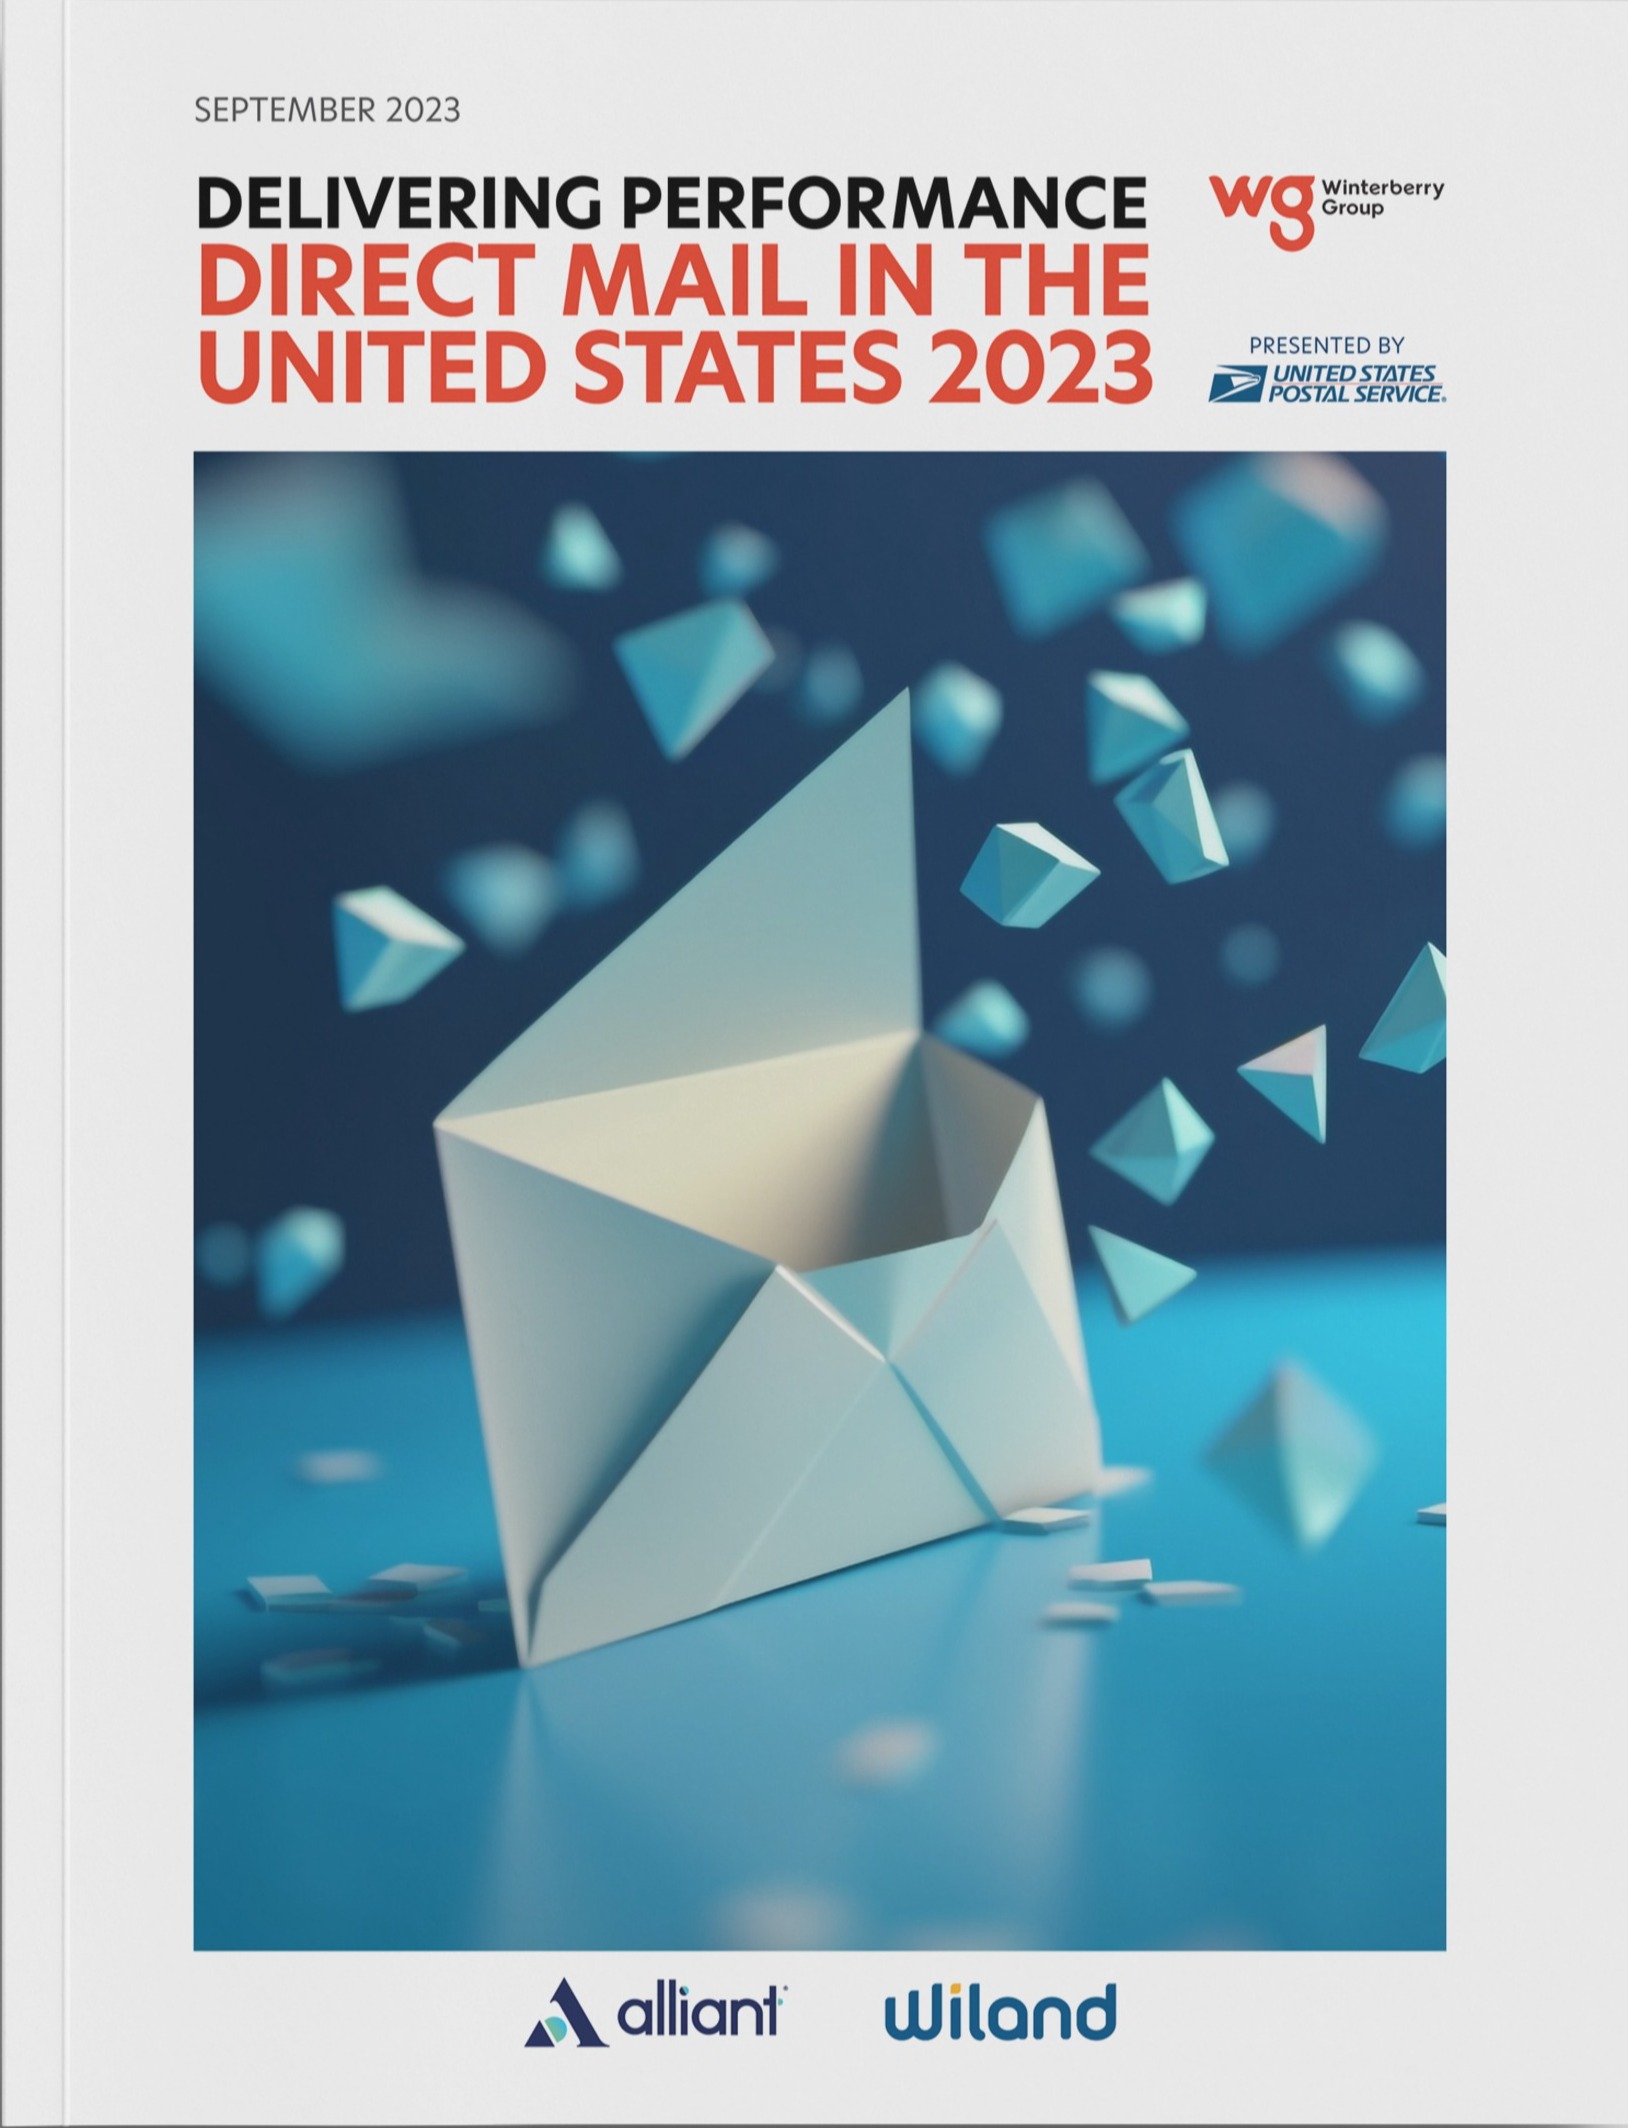 NEW RESEARCH ON U.S. DIRECT MAIL UNDERSCORES ADDRESSABILITY, MEASURABILITY AND PERSONALIZATION ATTRIBUTES